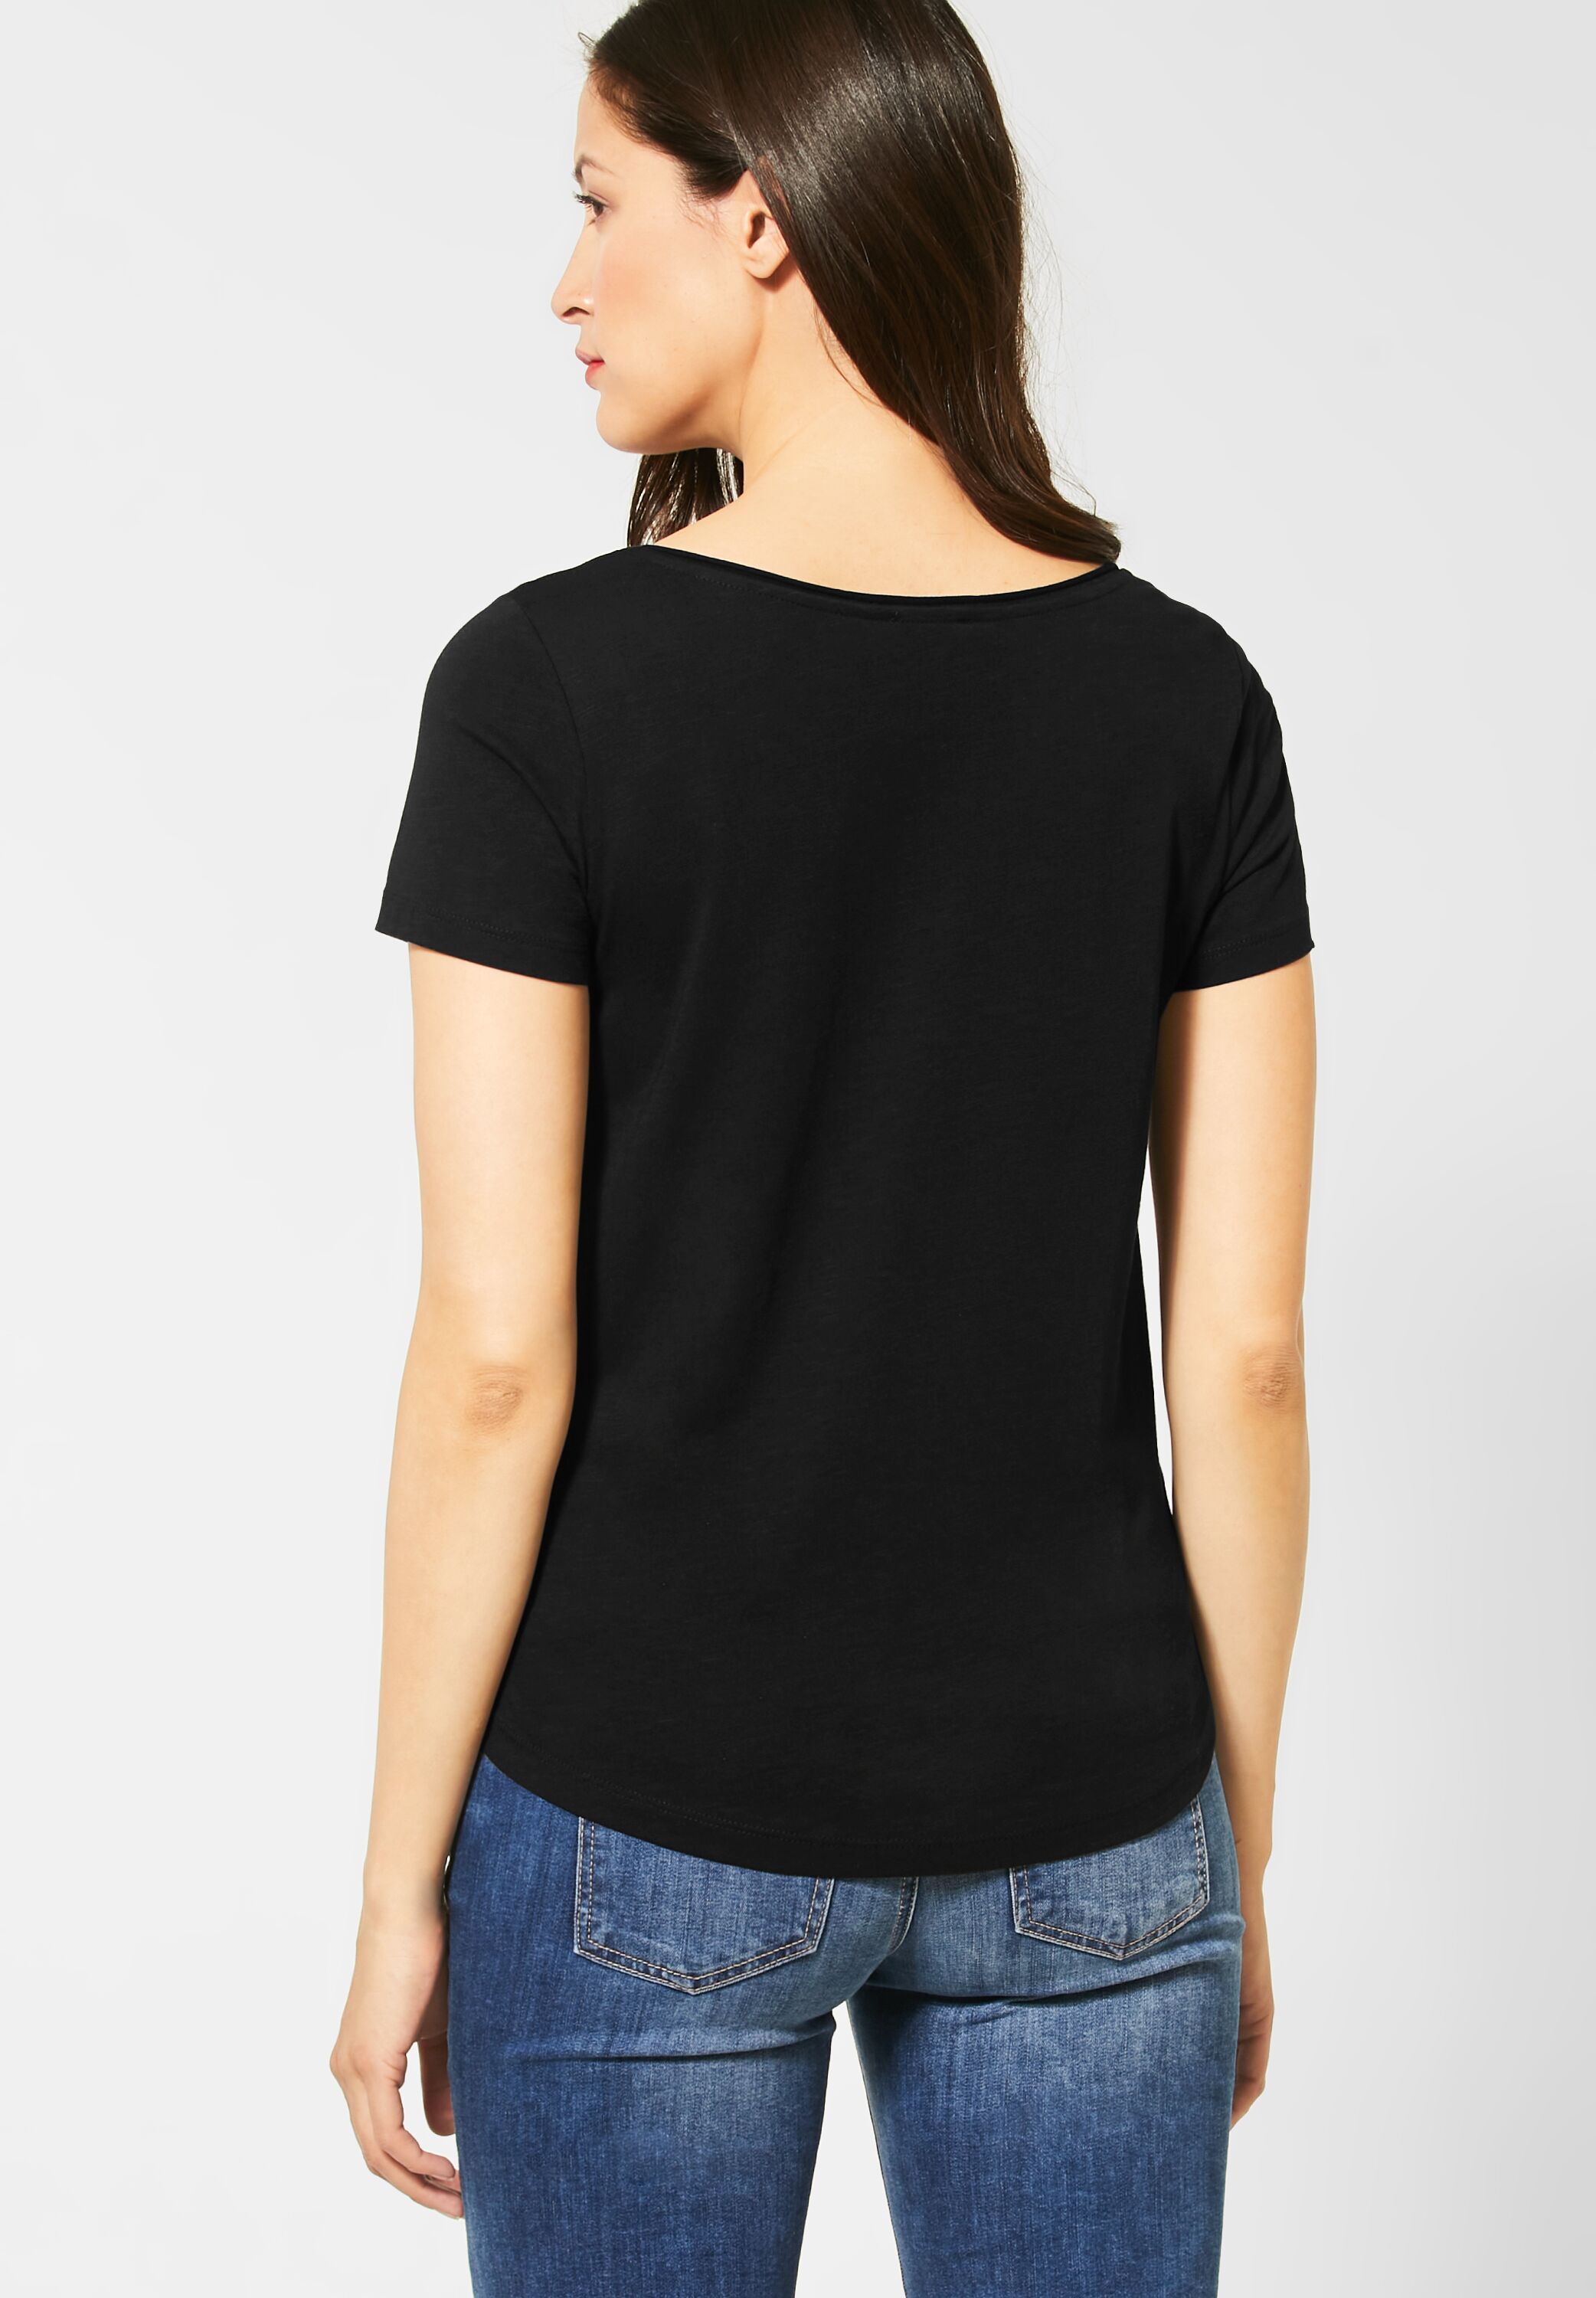 in CONCEPT Mode Street - T-Shirt Crista Black A314797-10001 One